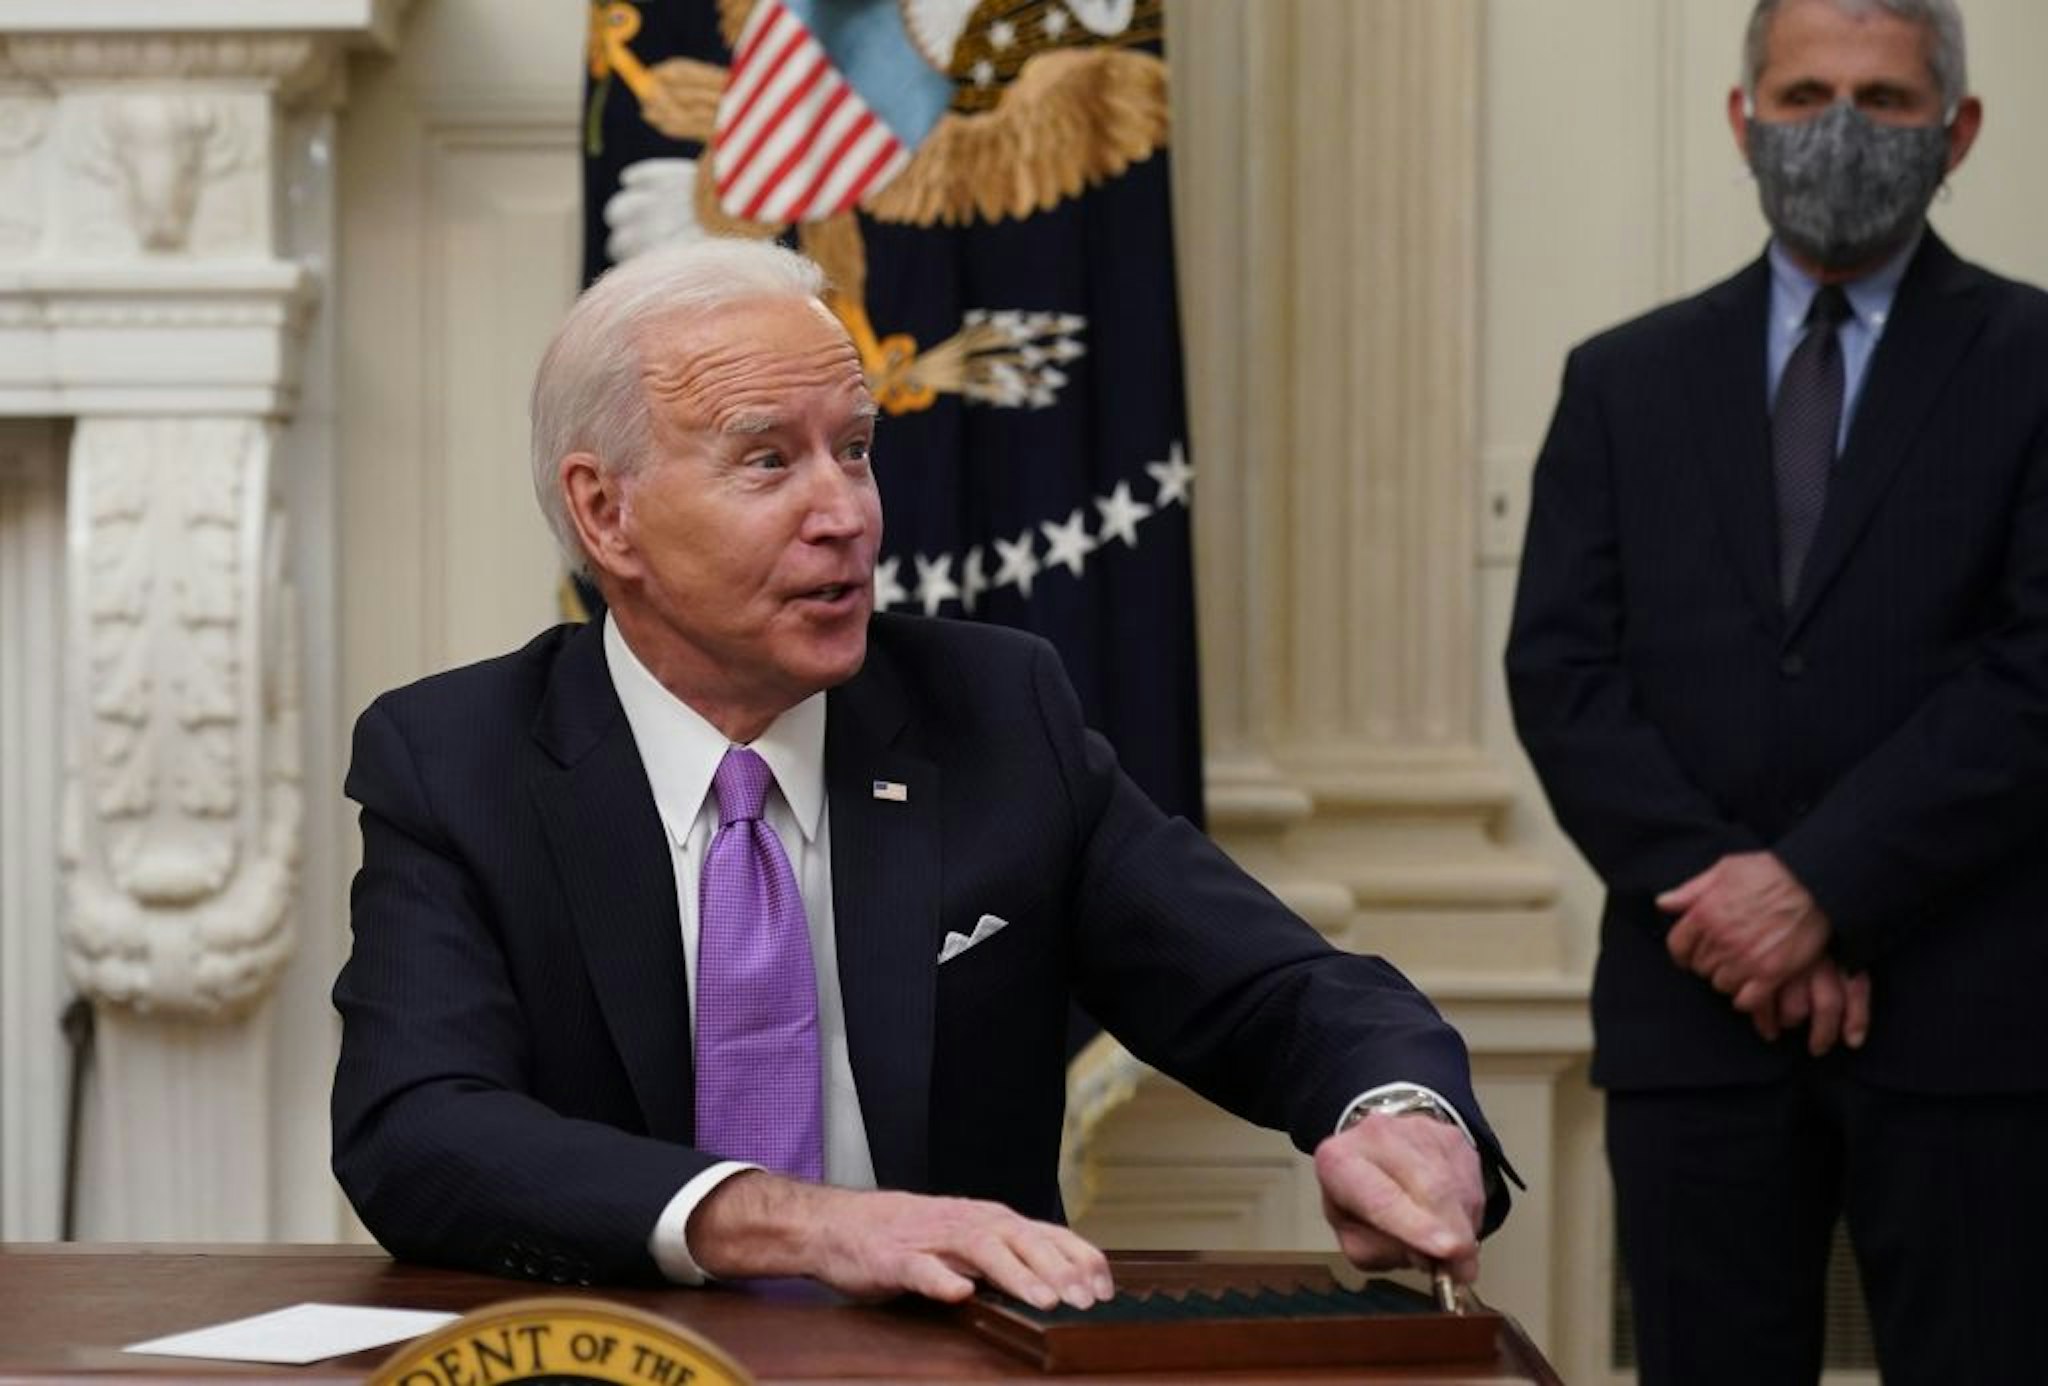 US President Joe Biden speaks to the press after signing executive orders as part of the Covid-19 response as Director of NIAID Anthony Fauci looks on in the State Dining Room of the White House in Washington, DC, on January 21, 2021. (Photo by MANDEL NGAN / AFP) (Photo by MANDEL NGAN/AFP via Getty Images)